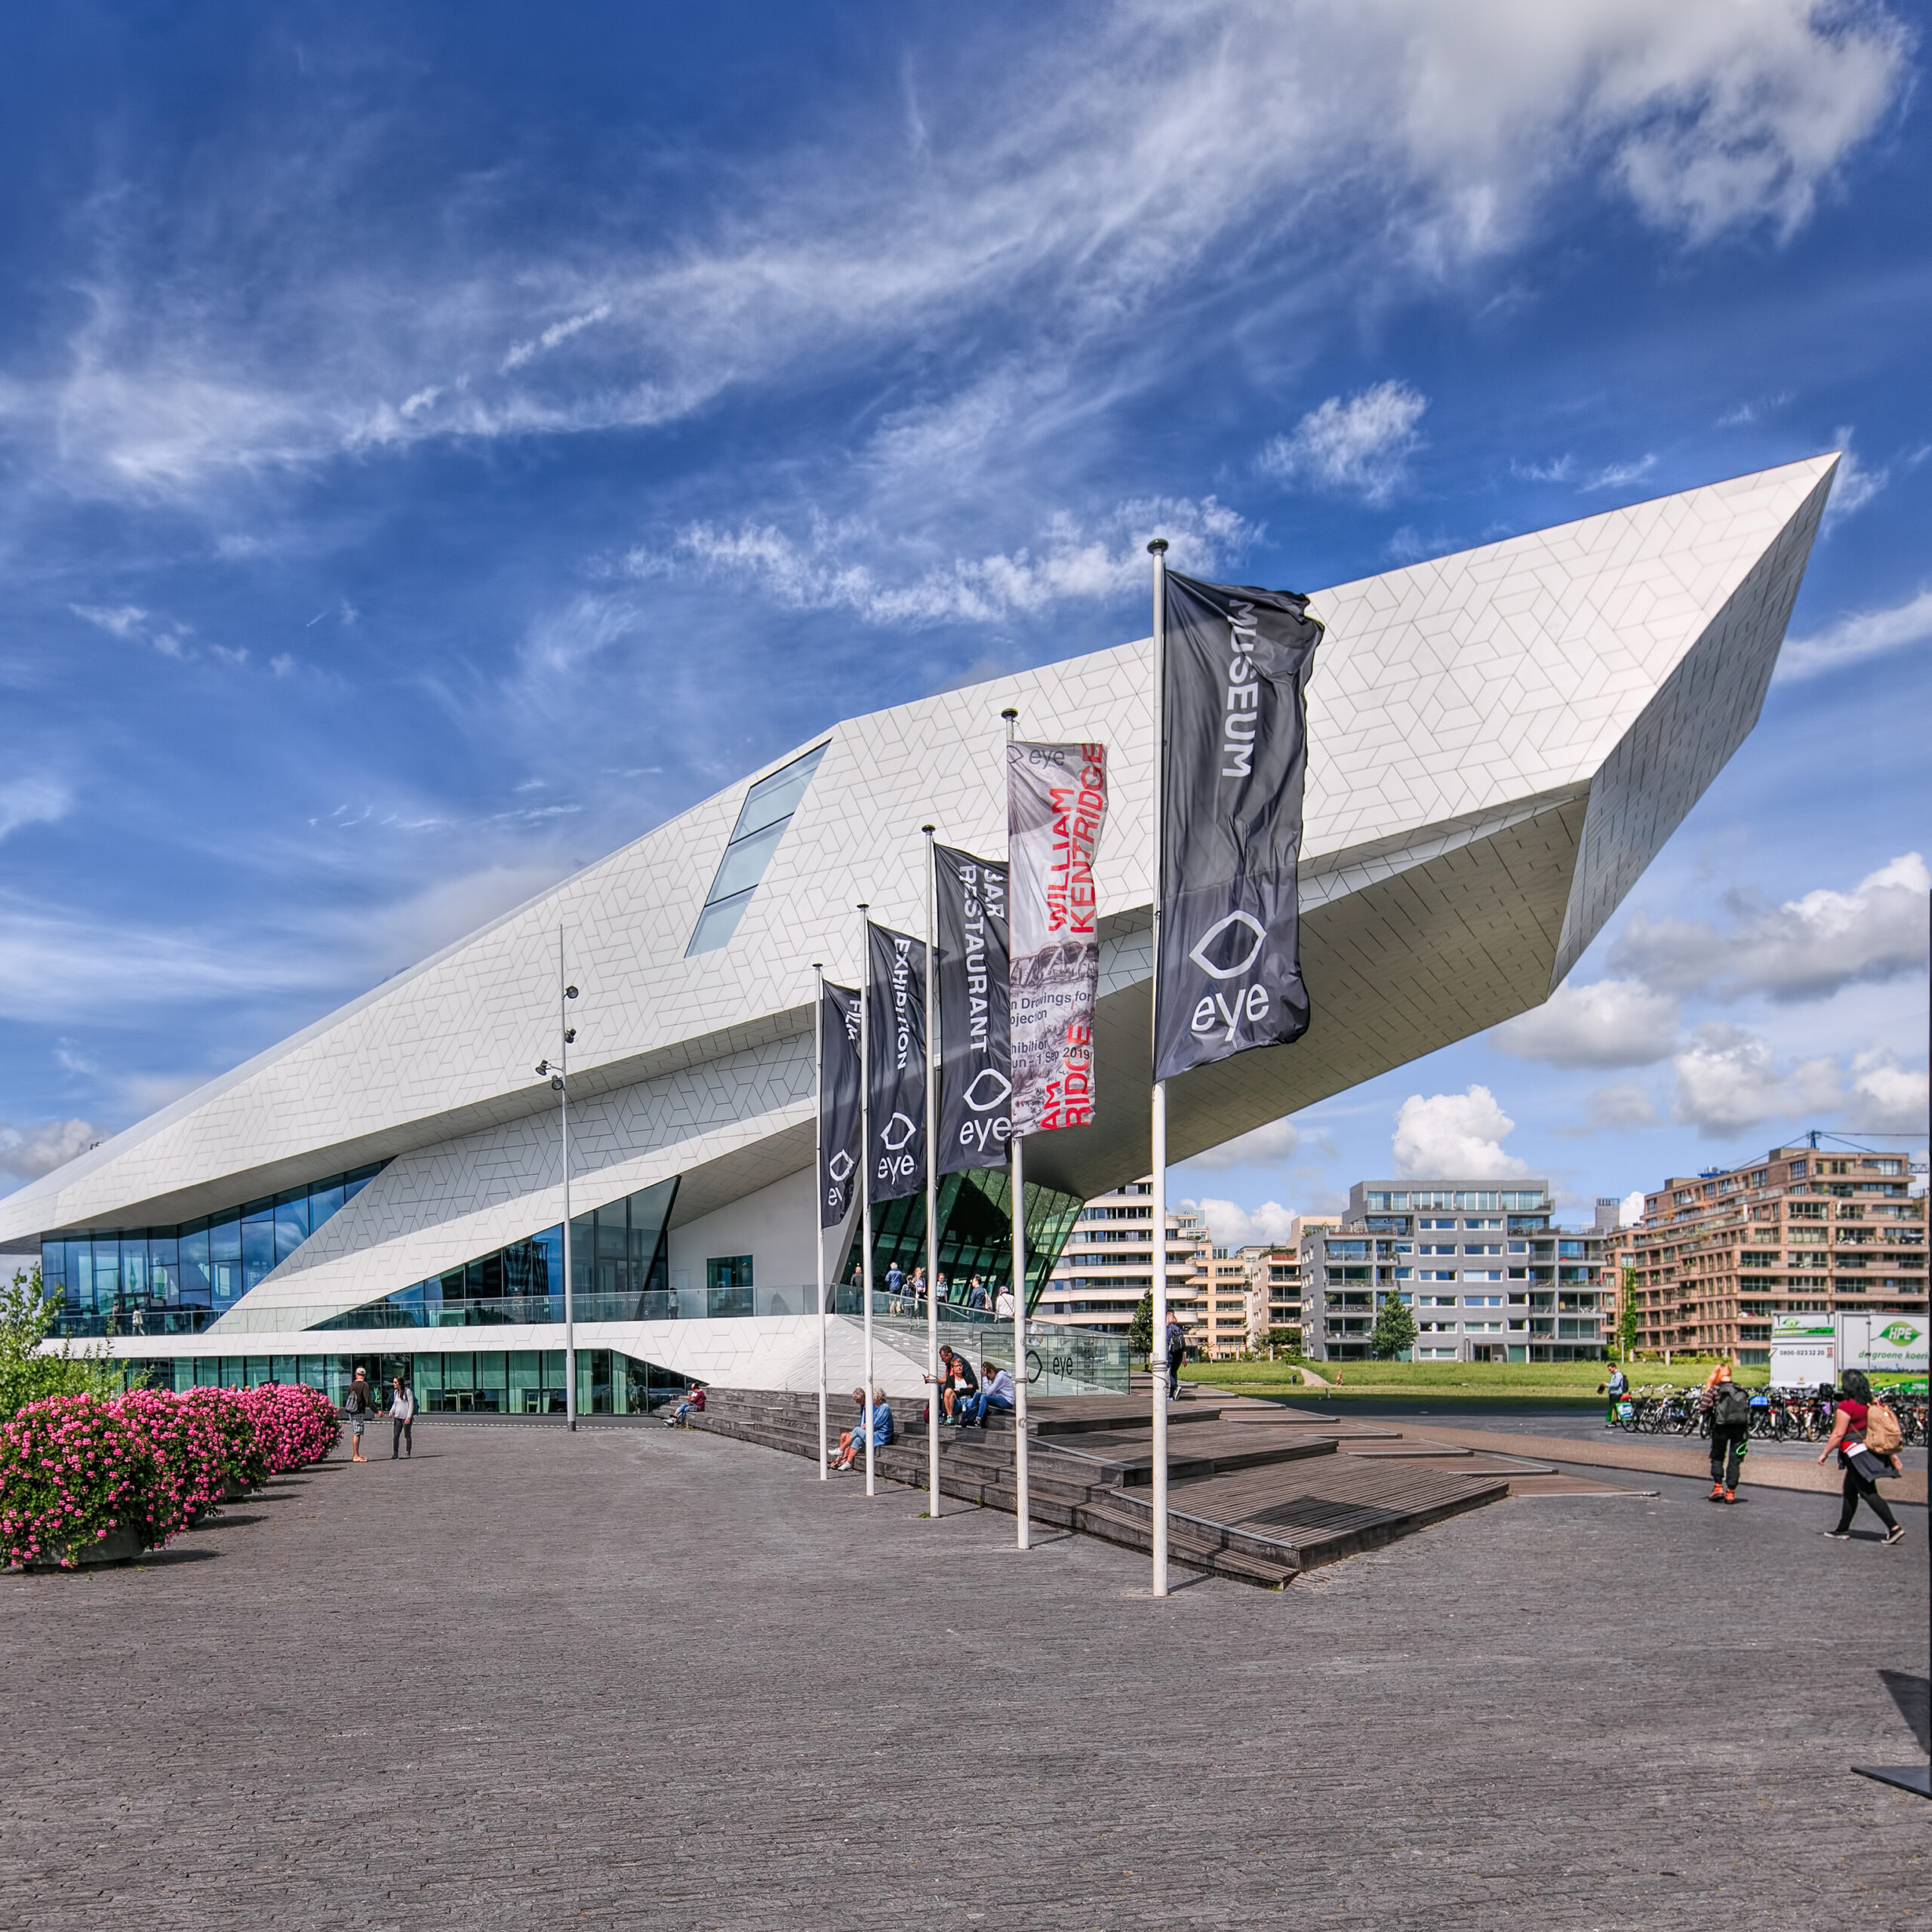 AMSTERDAM-AUG. 8, 2019. The iconic Eye Film Museum, archive and